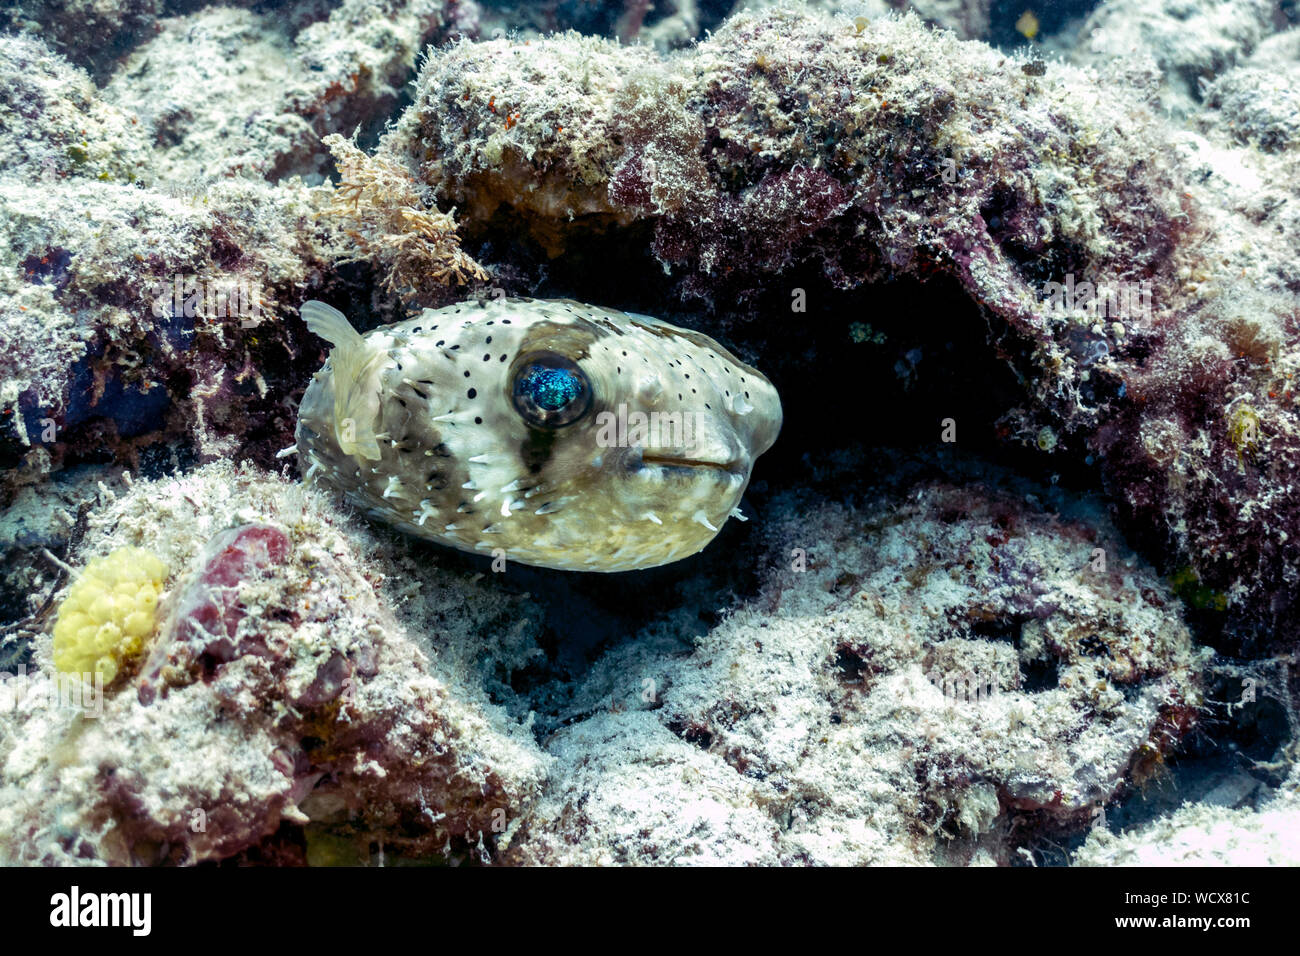 Blowfish or Puffer Fish in Coral Reef, Borneo Stock Photo